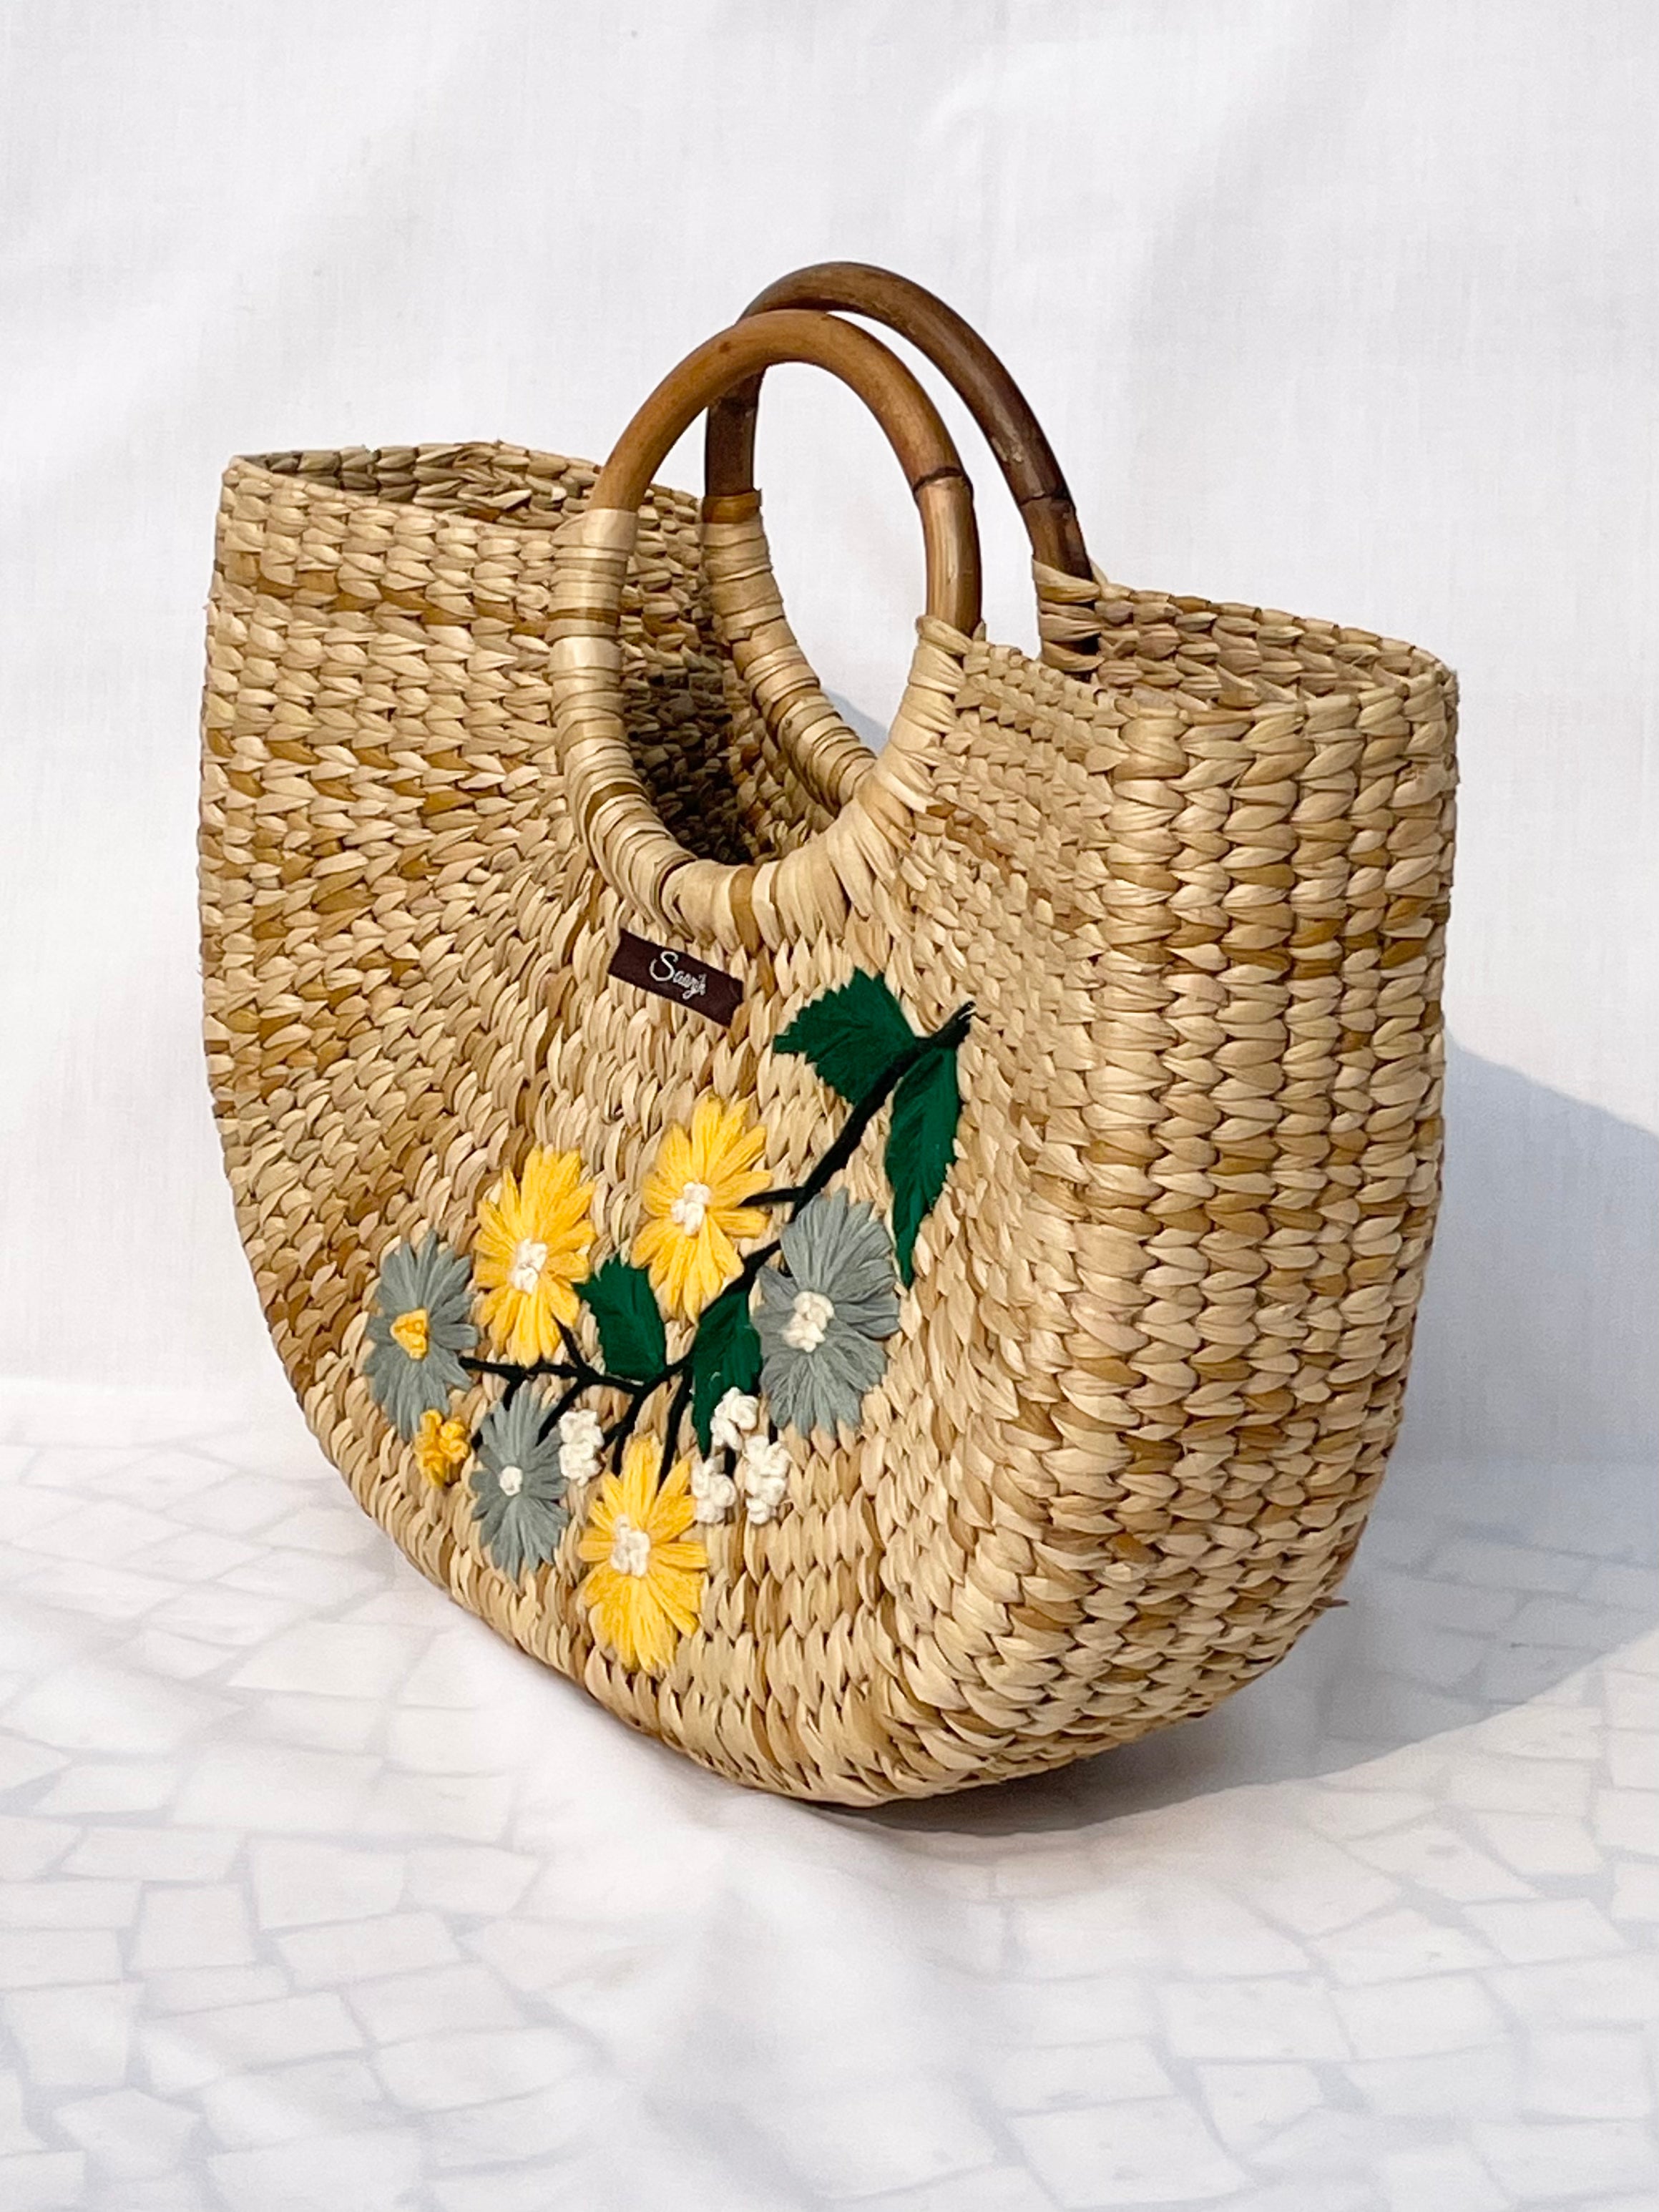 Kauna grass craft Manipur free delivery shop online gifts for her handbag cane bag manufacturers in India bamboo basket products embroidery handwoven bags mothers day gift handmade beach bag shopping basket straw bag mumbai